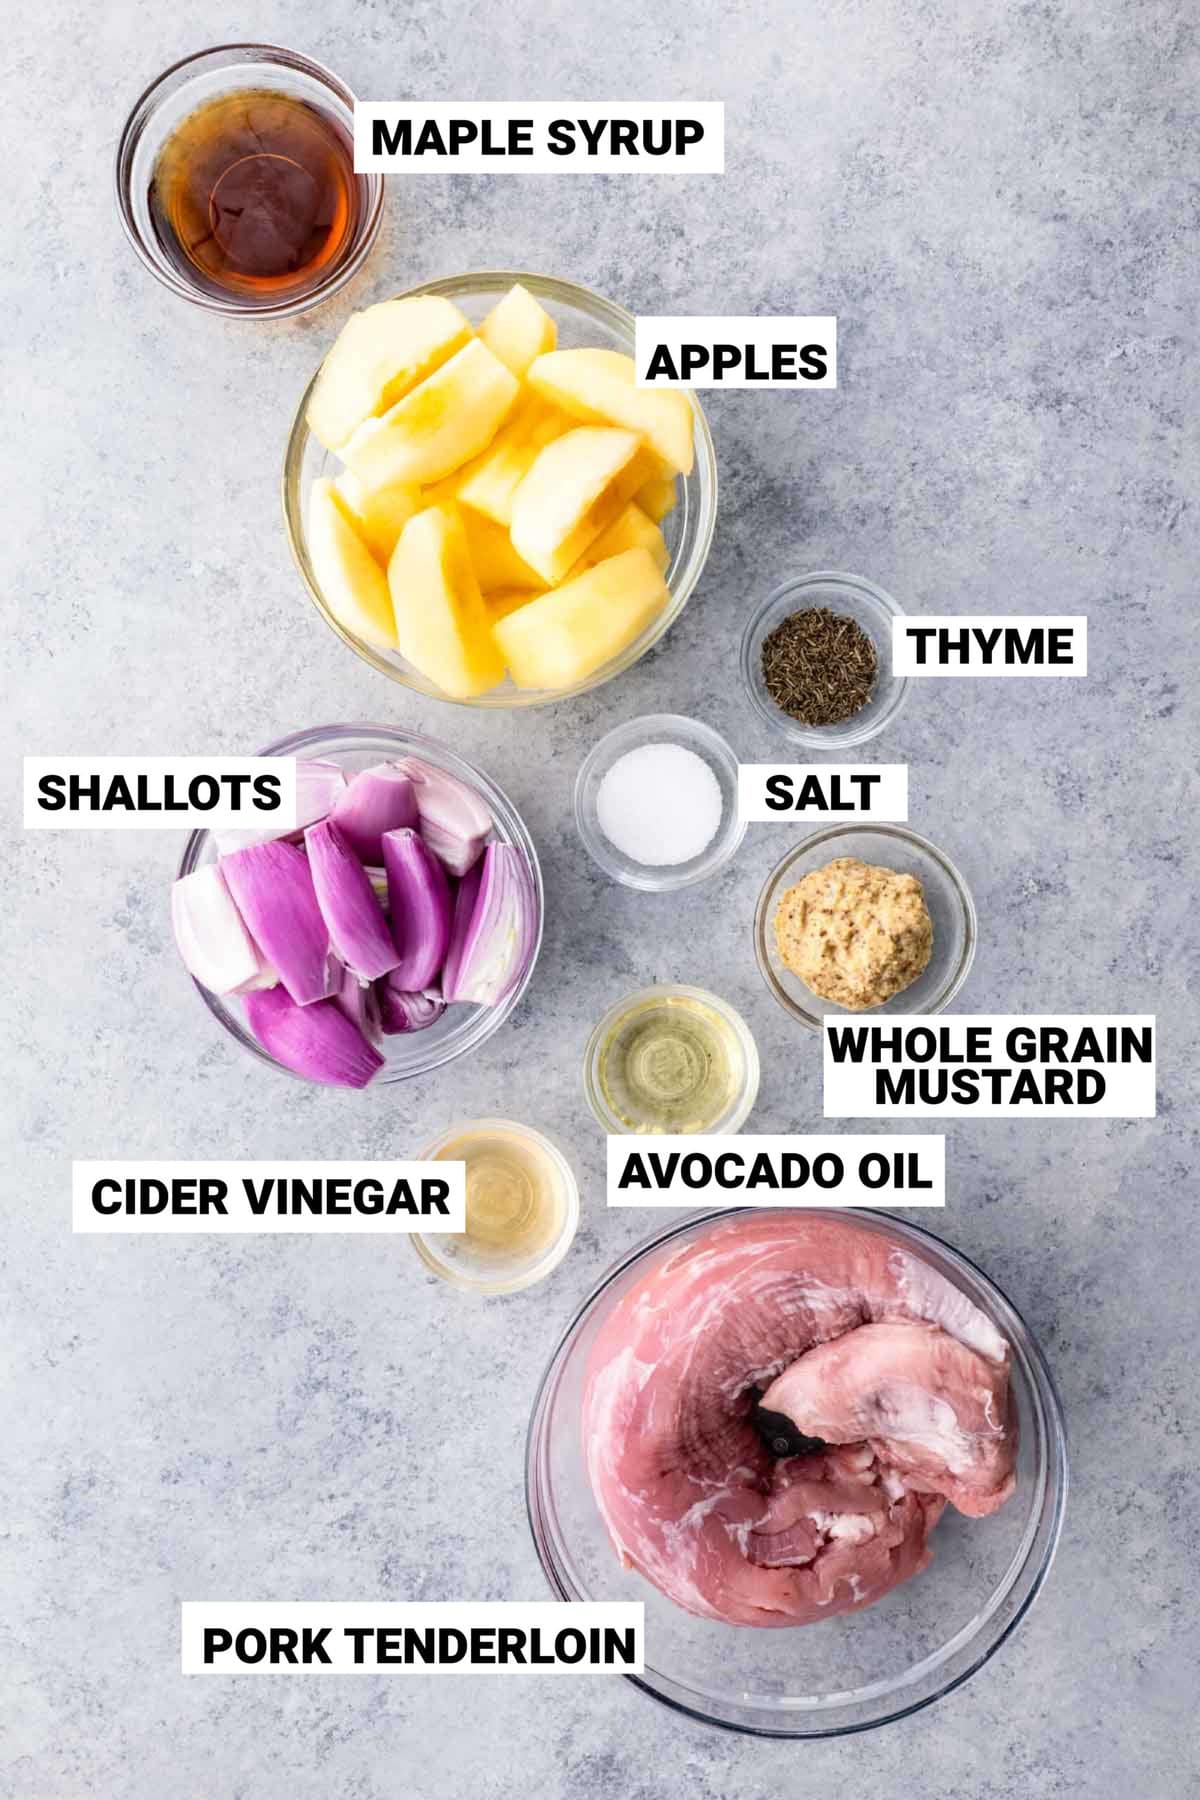 ingredients for the recipe with text overlay to label them